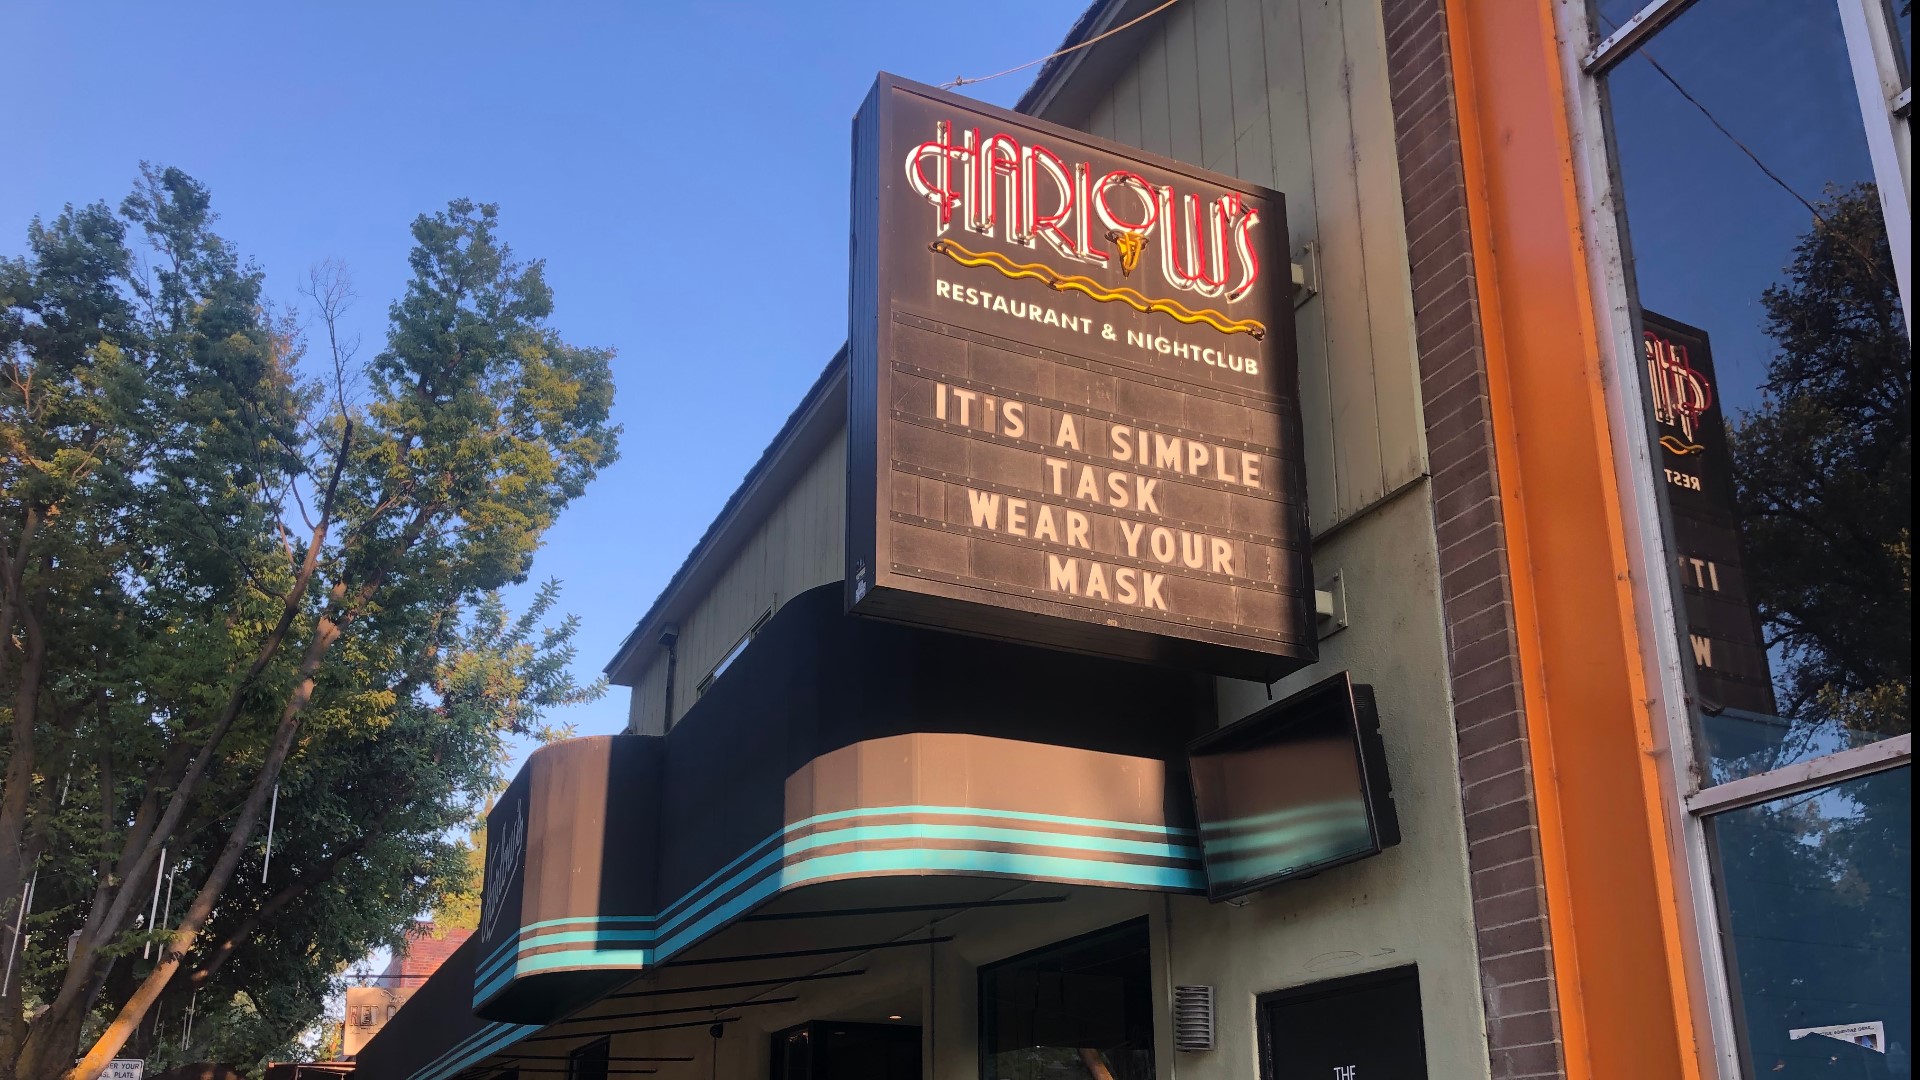 Entertainment venues were among the first to close and will likely be some of the last to be allowed to reopen. Sacramento's venues want to find a way to survive.